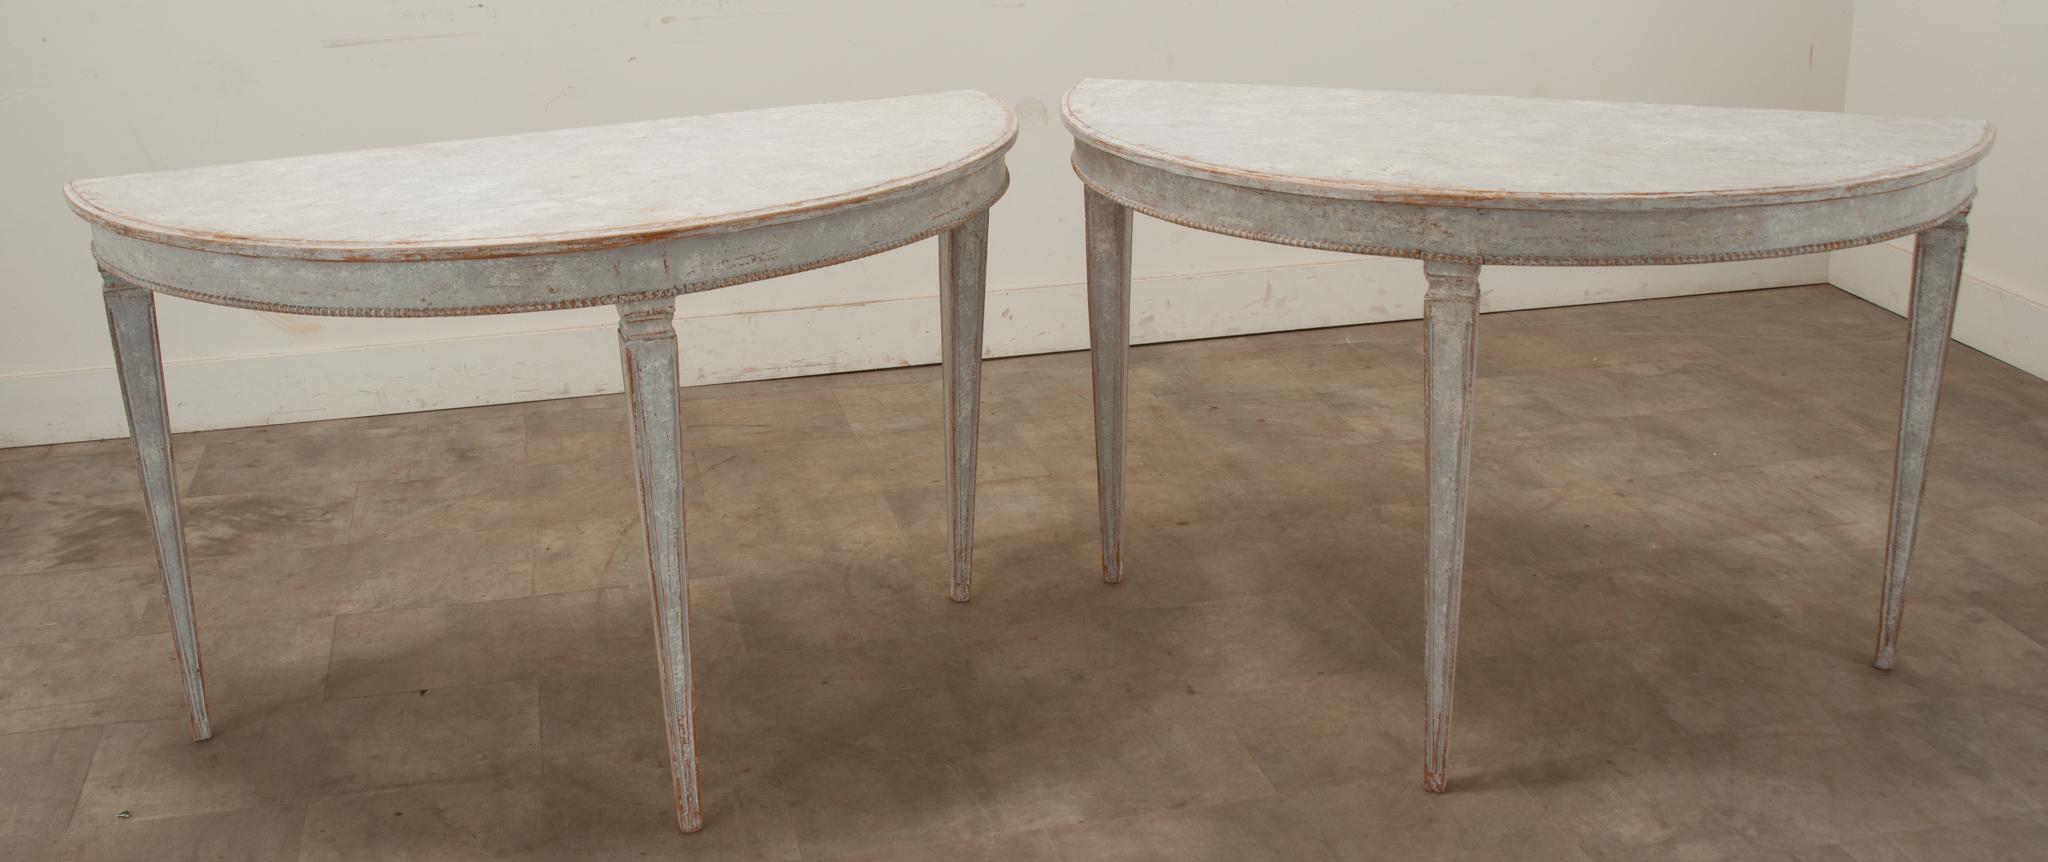 An elegant pair of Swedish Gustavian 18th Century painted demilune consoles. This pair of consoles can be used separately against a wall or they can pull together to create a round center or dining table. Simple in design this pair makes a